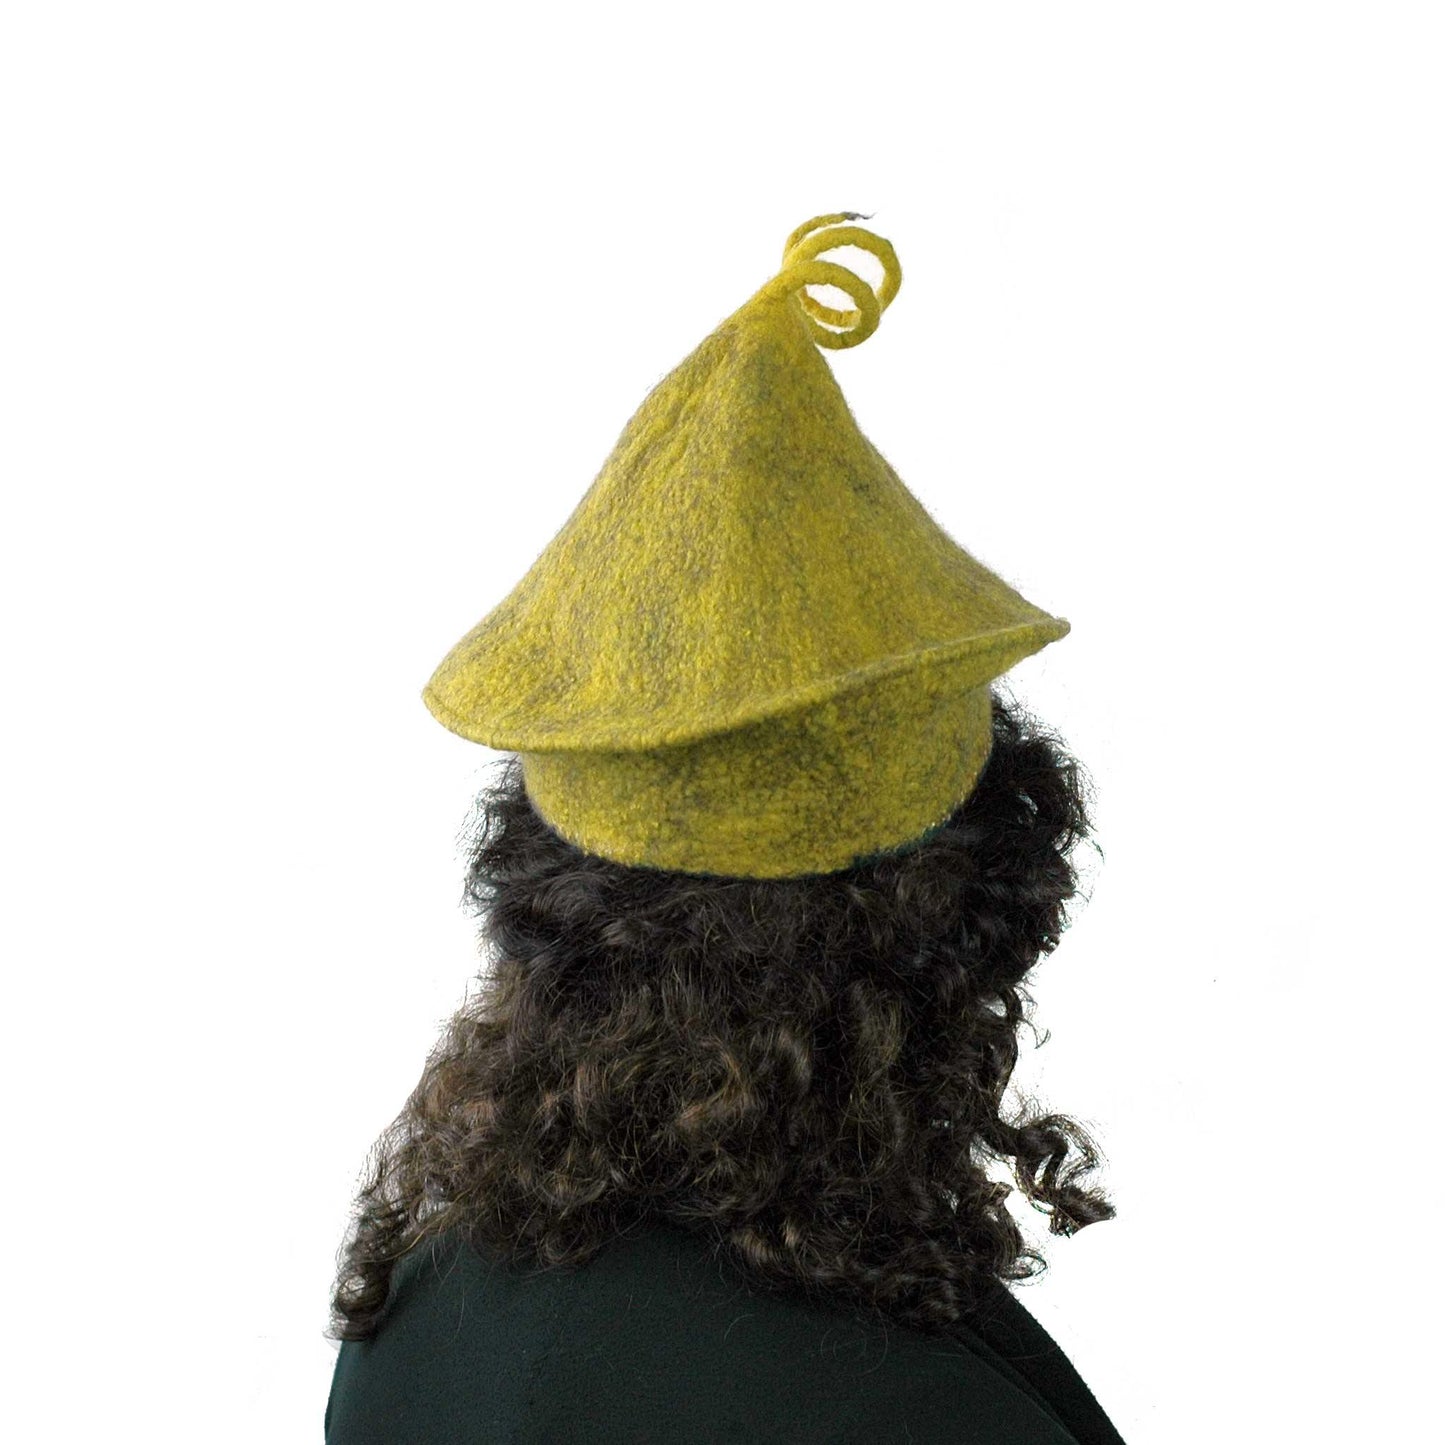 Curlicue Beret in Mustard Yellow - back view